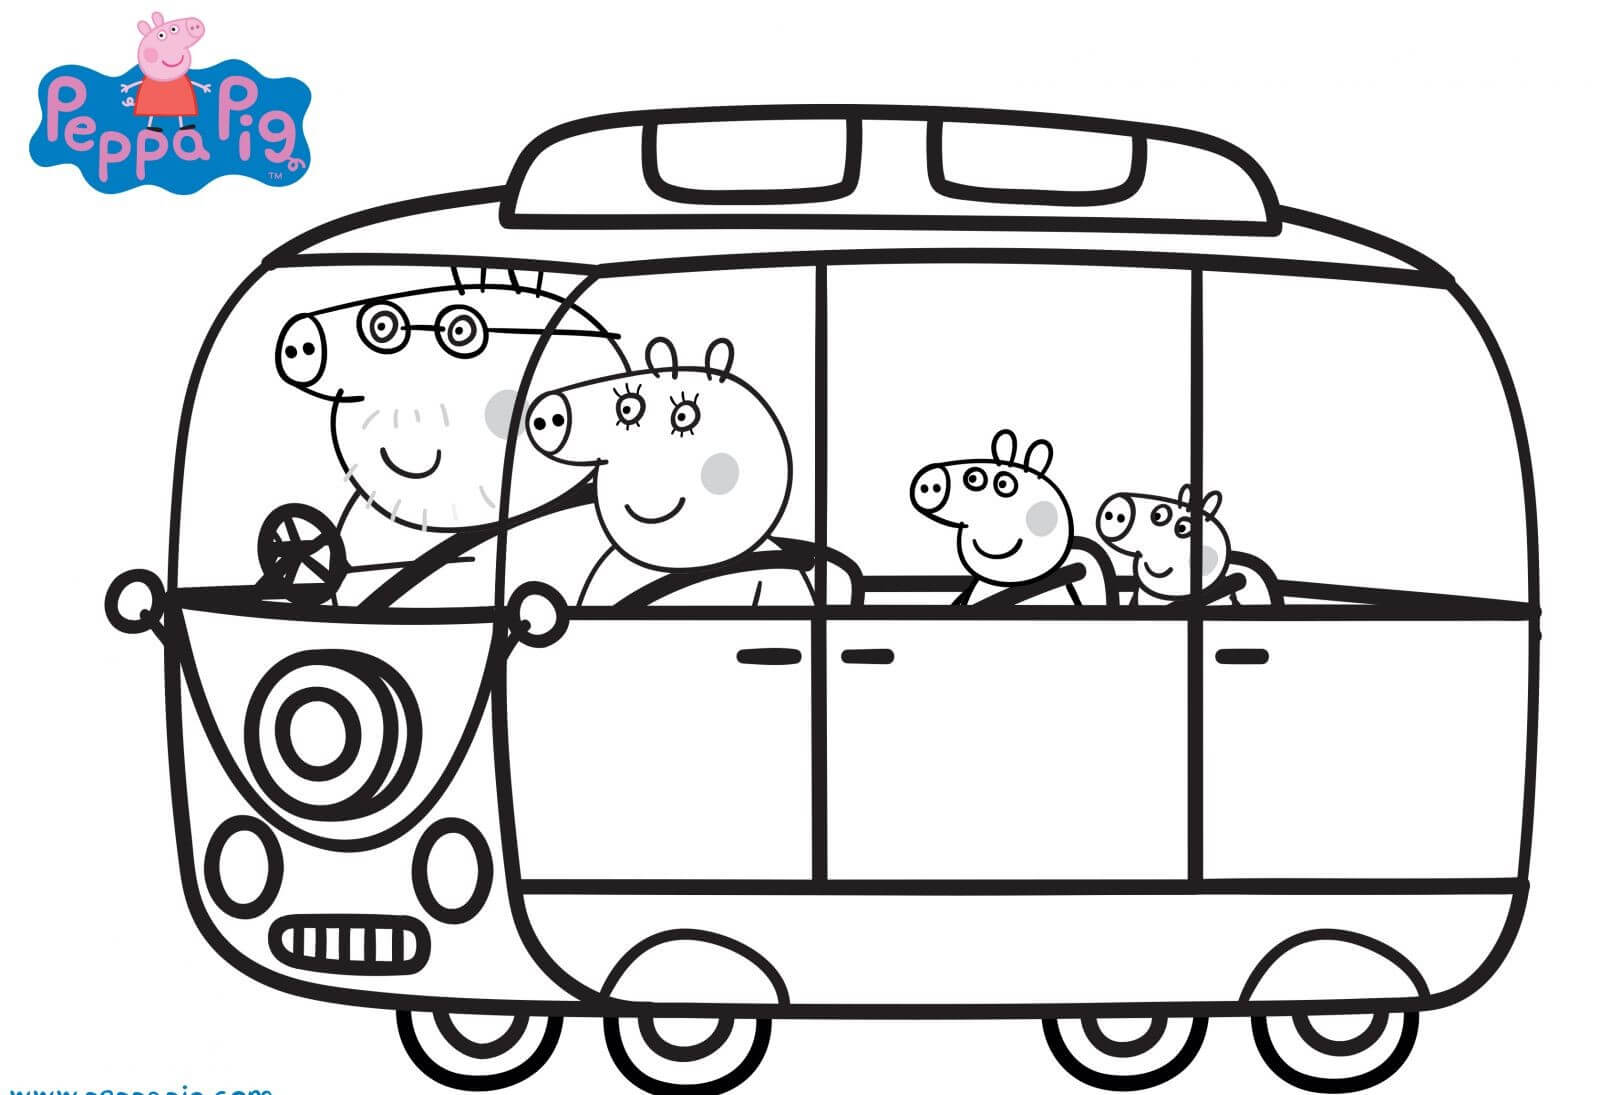 family peppa pig coloring page Pig peppa coloring family whole ...